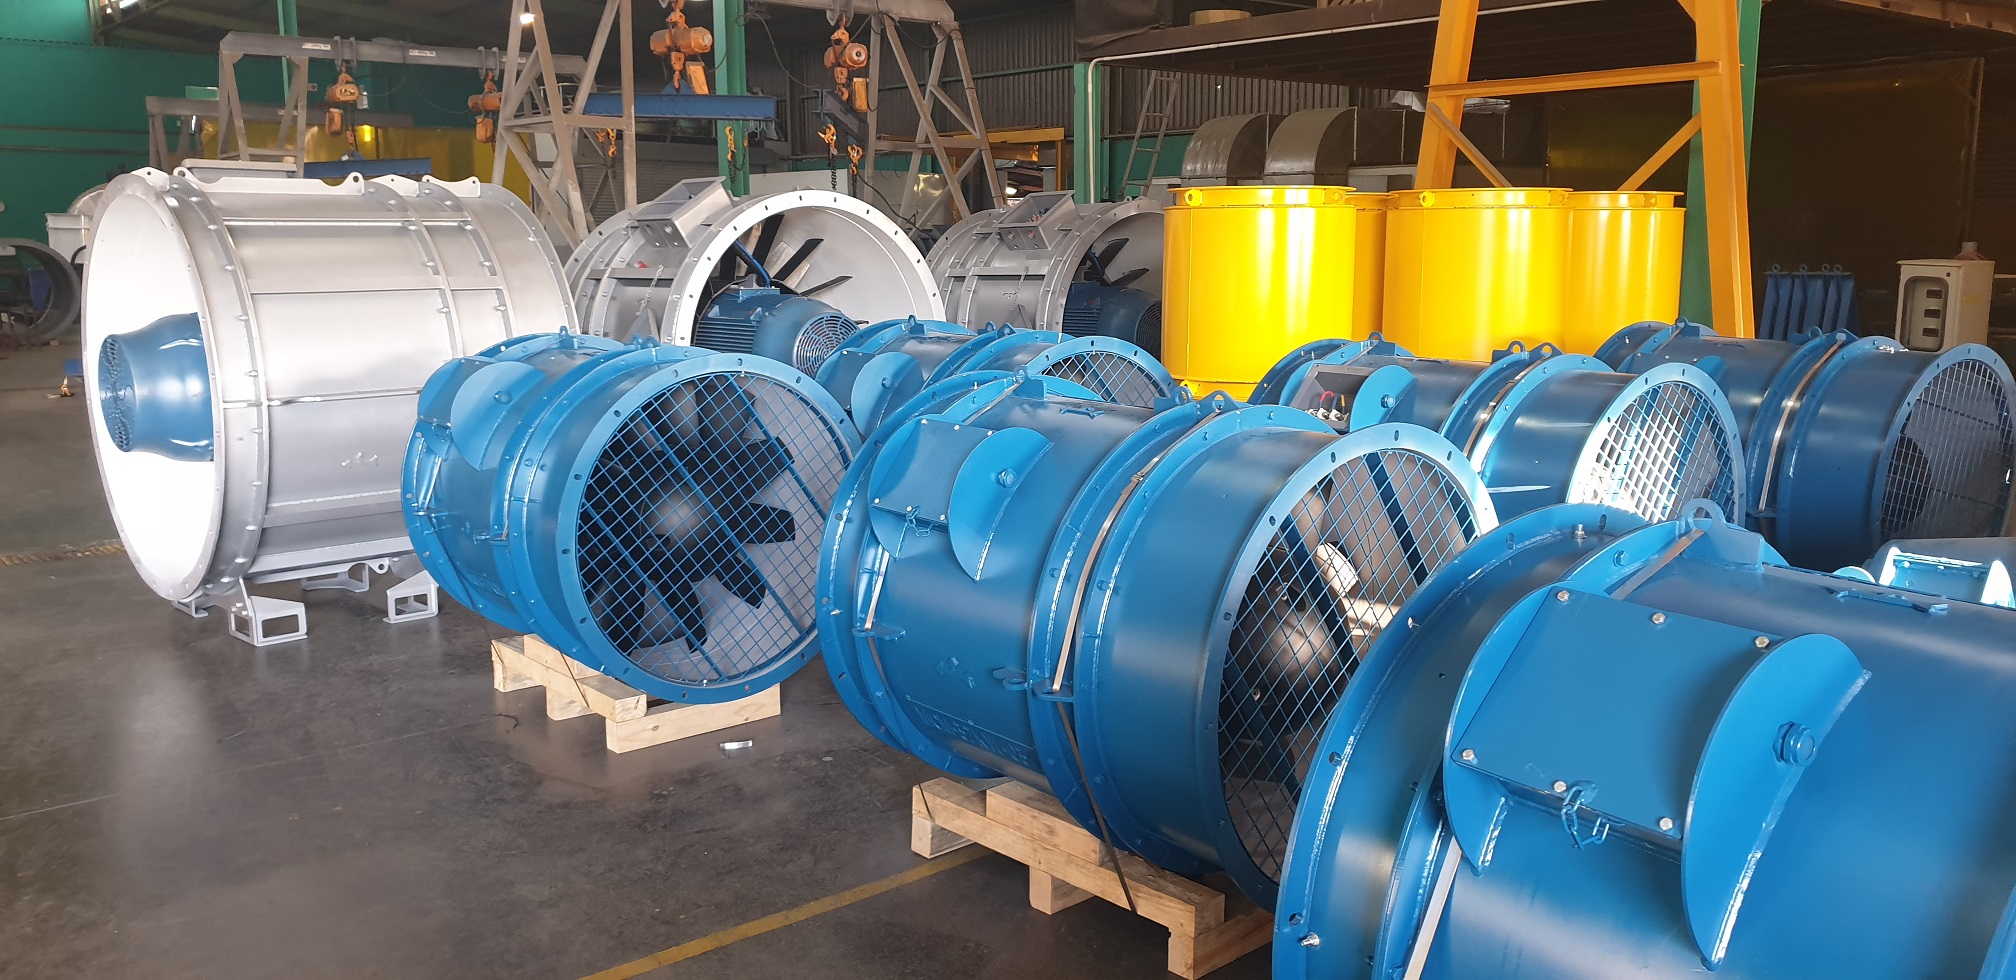 turbo fan tlt range mining booster africa auxiliary redesigned ventilation mine industry worldwide clients needs specifically meets redesigns specific meet